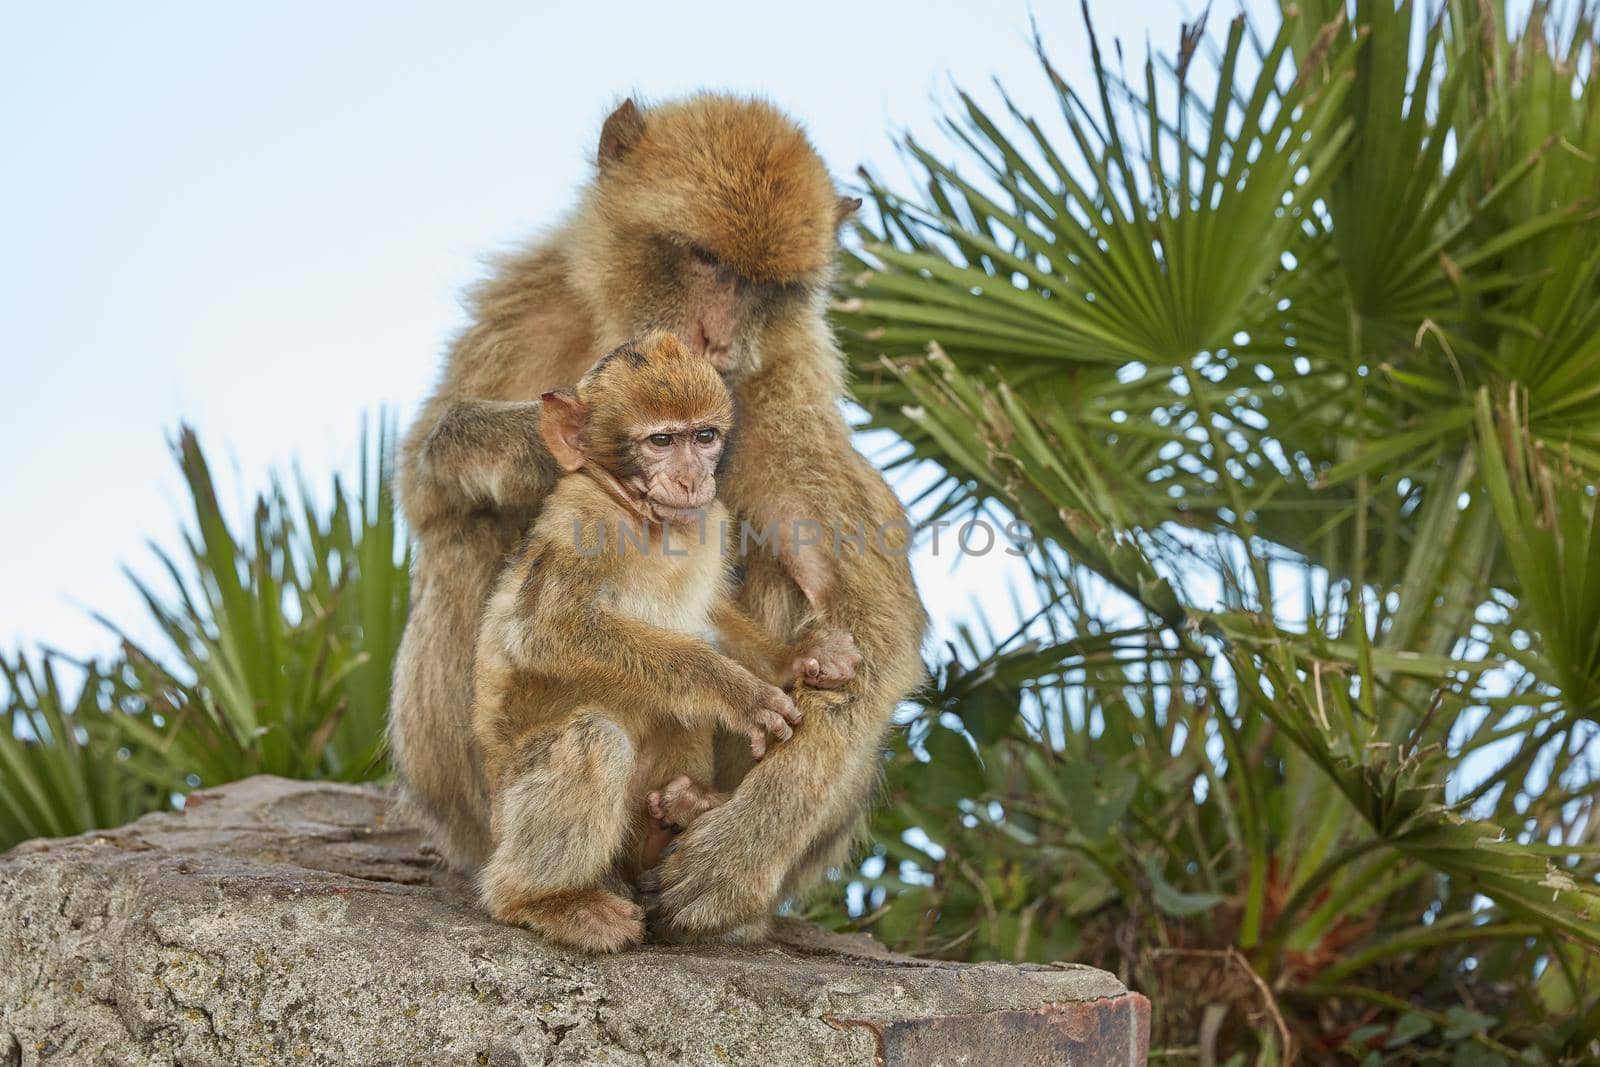 Mother and baby of the Barbary Macaque monkeys of Gibraltar. by wondry